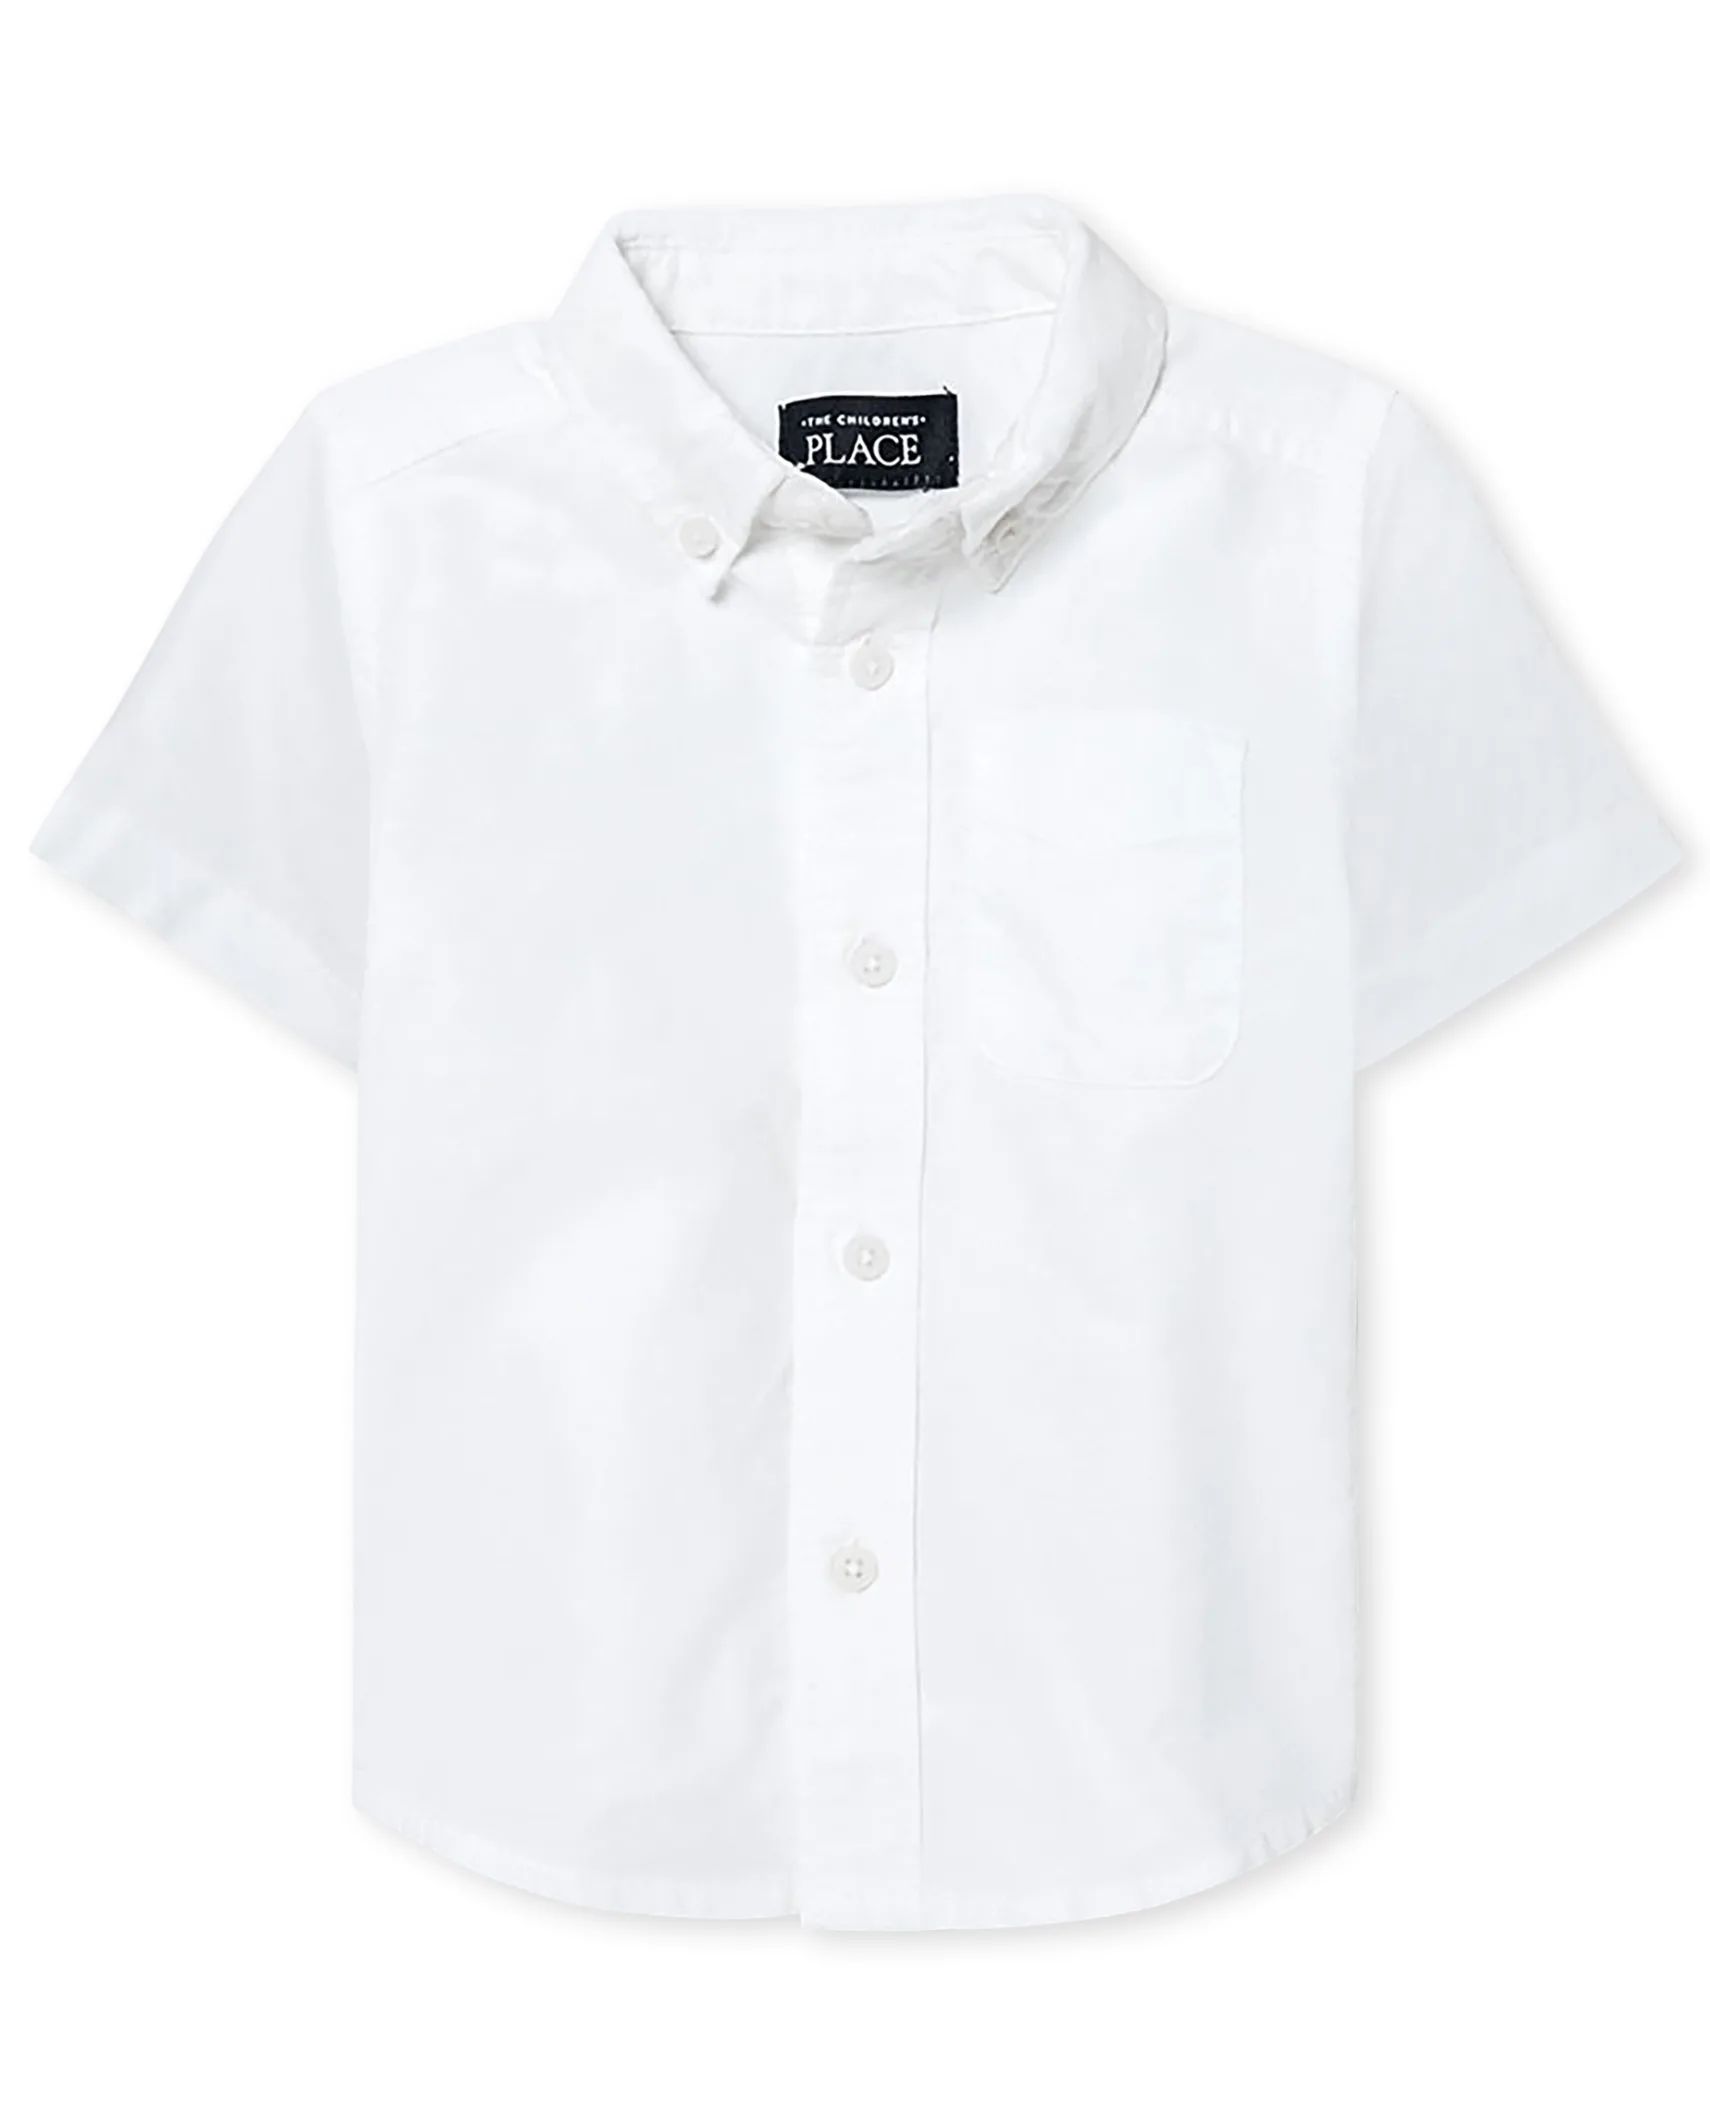 Baby And Toddler Boys Uniform Short Sleeve Oxford Button Down Shirt | The Children's Place  - WHI... | The Children's Place